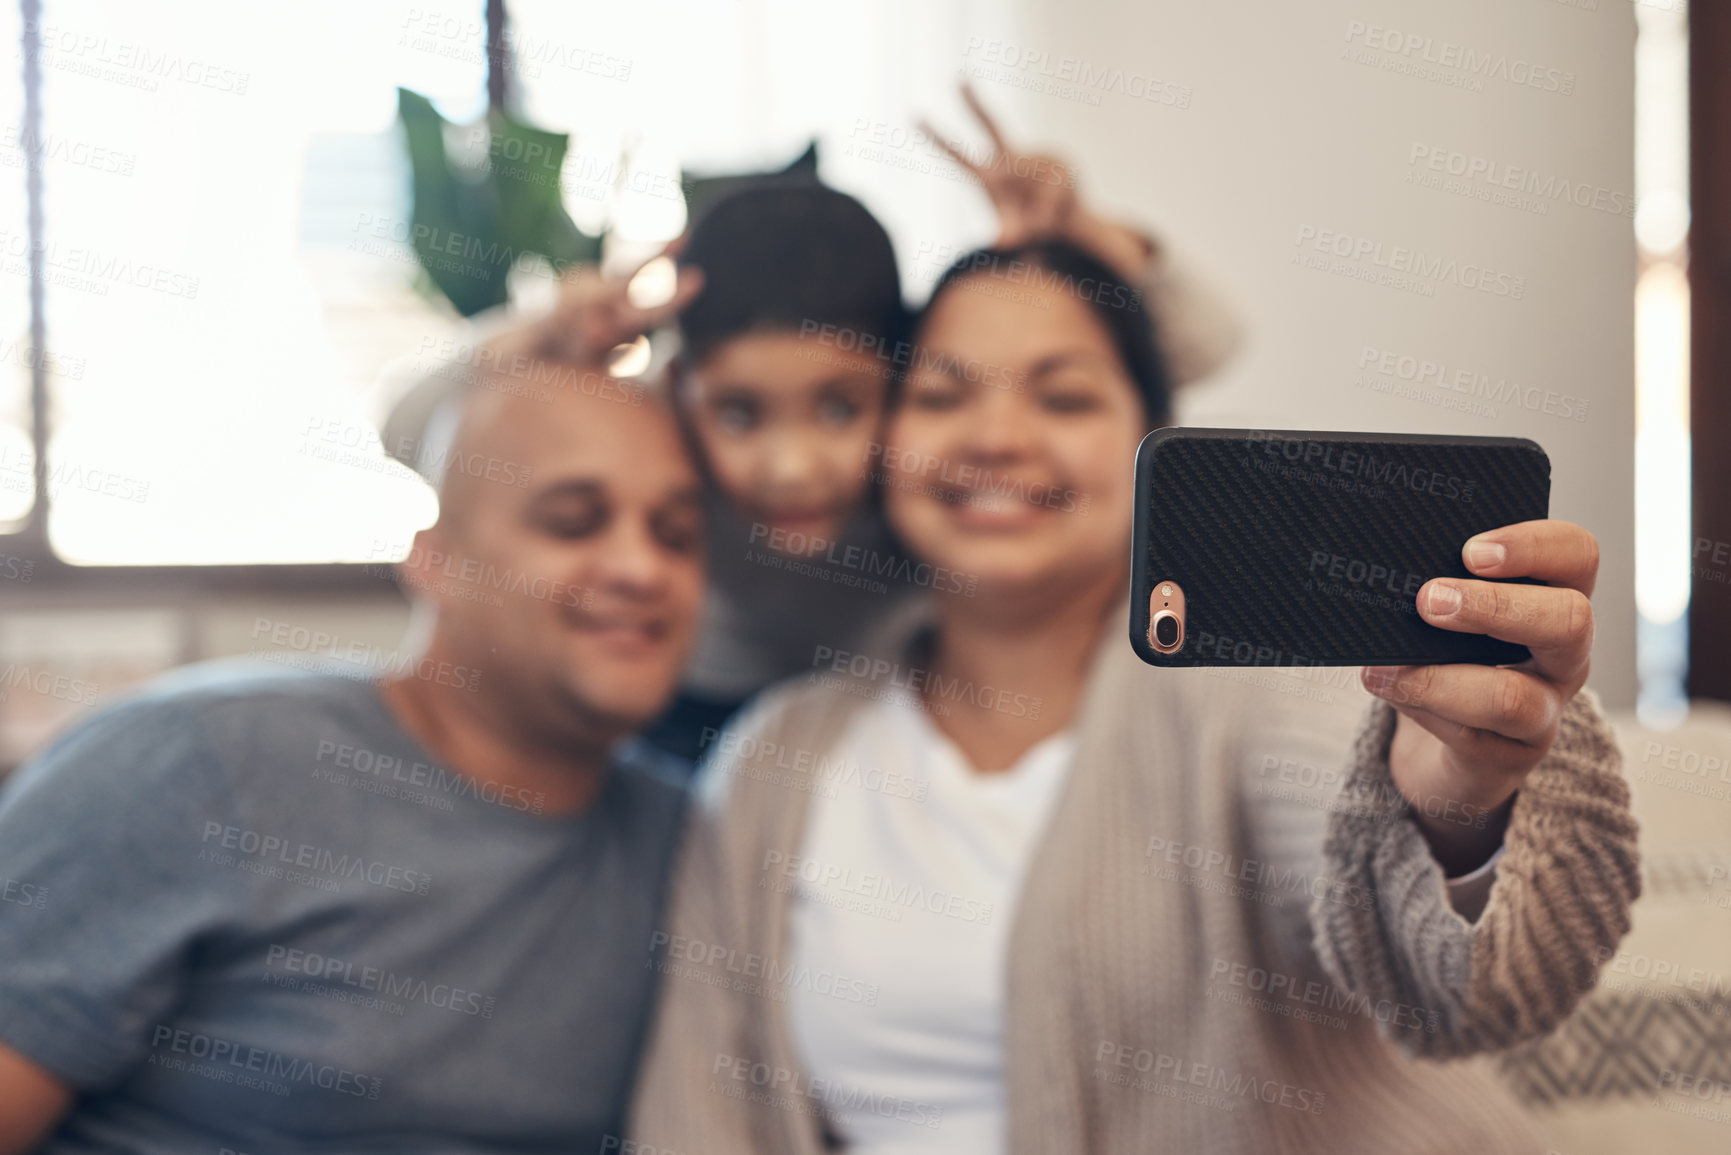 Buy stock photo Shot of a happy young family taking selfies with a smartphone on the sofa at home